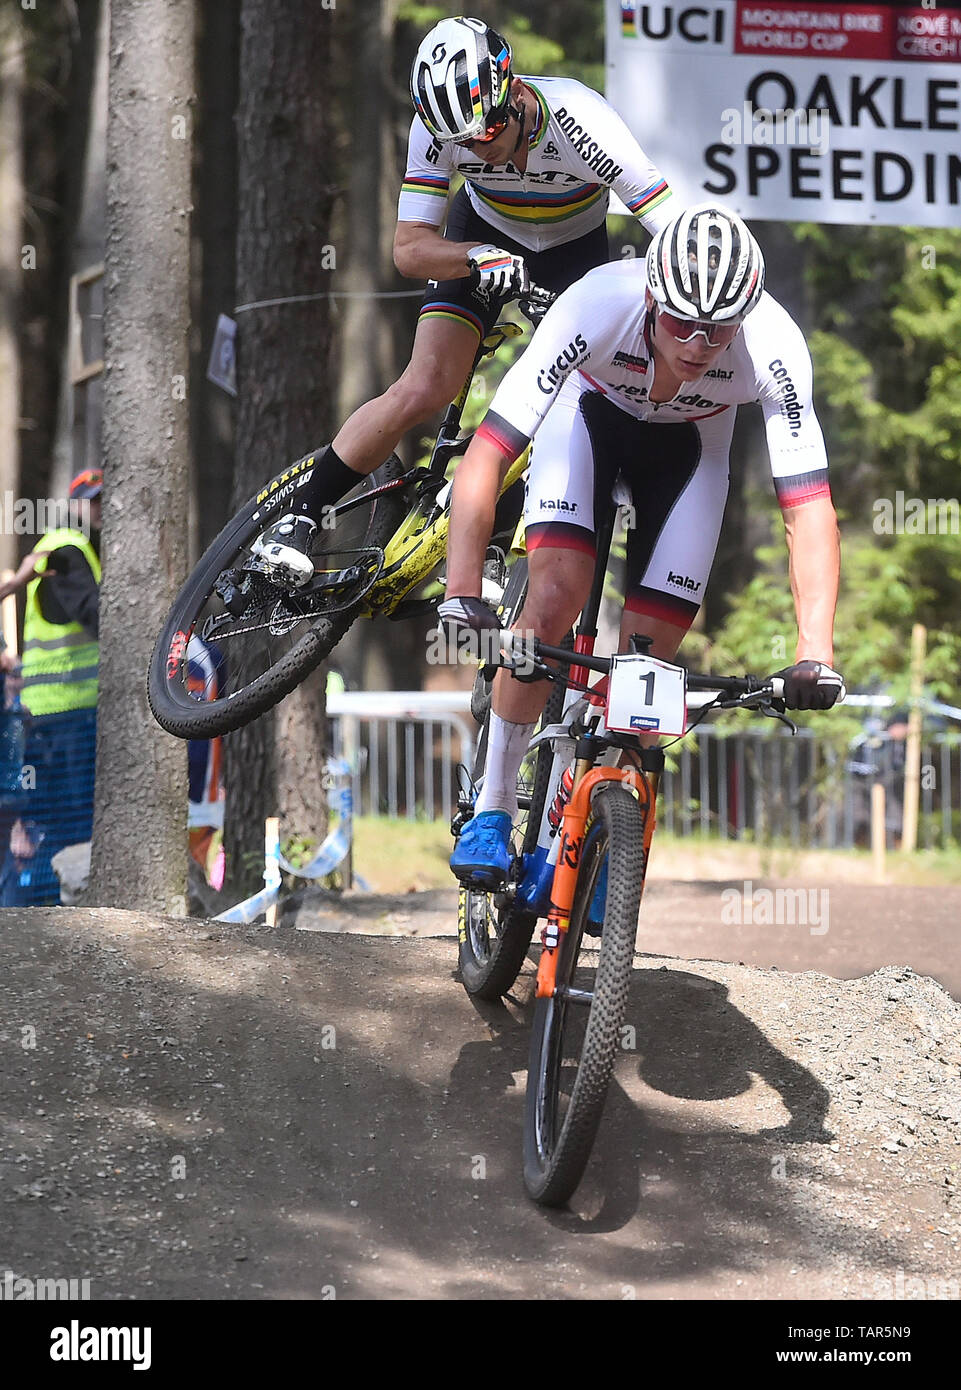 From left NINO SCHURTER of Switzerland and MATHIEU VAN DER POEL of  Netherlands in action during the men elite Cross Country Mountain Bike  World Cup event in Nove Mesto na Morave, Czech